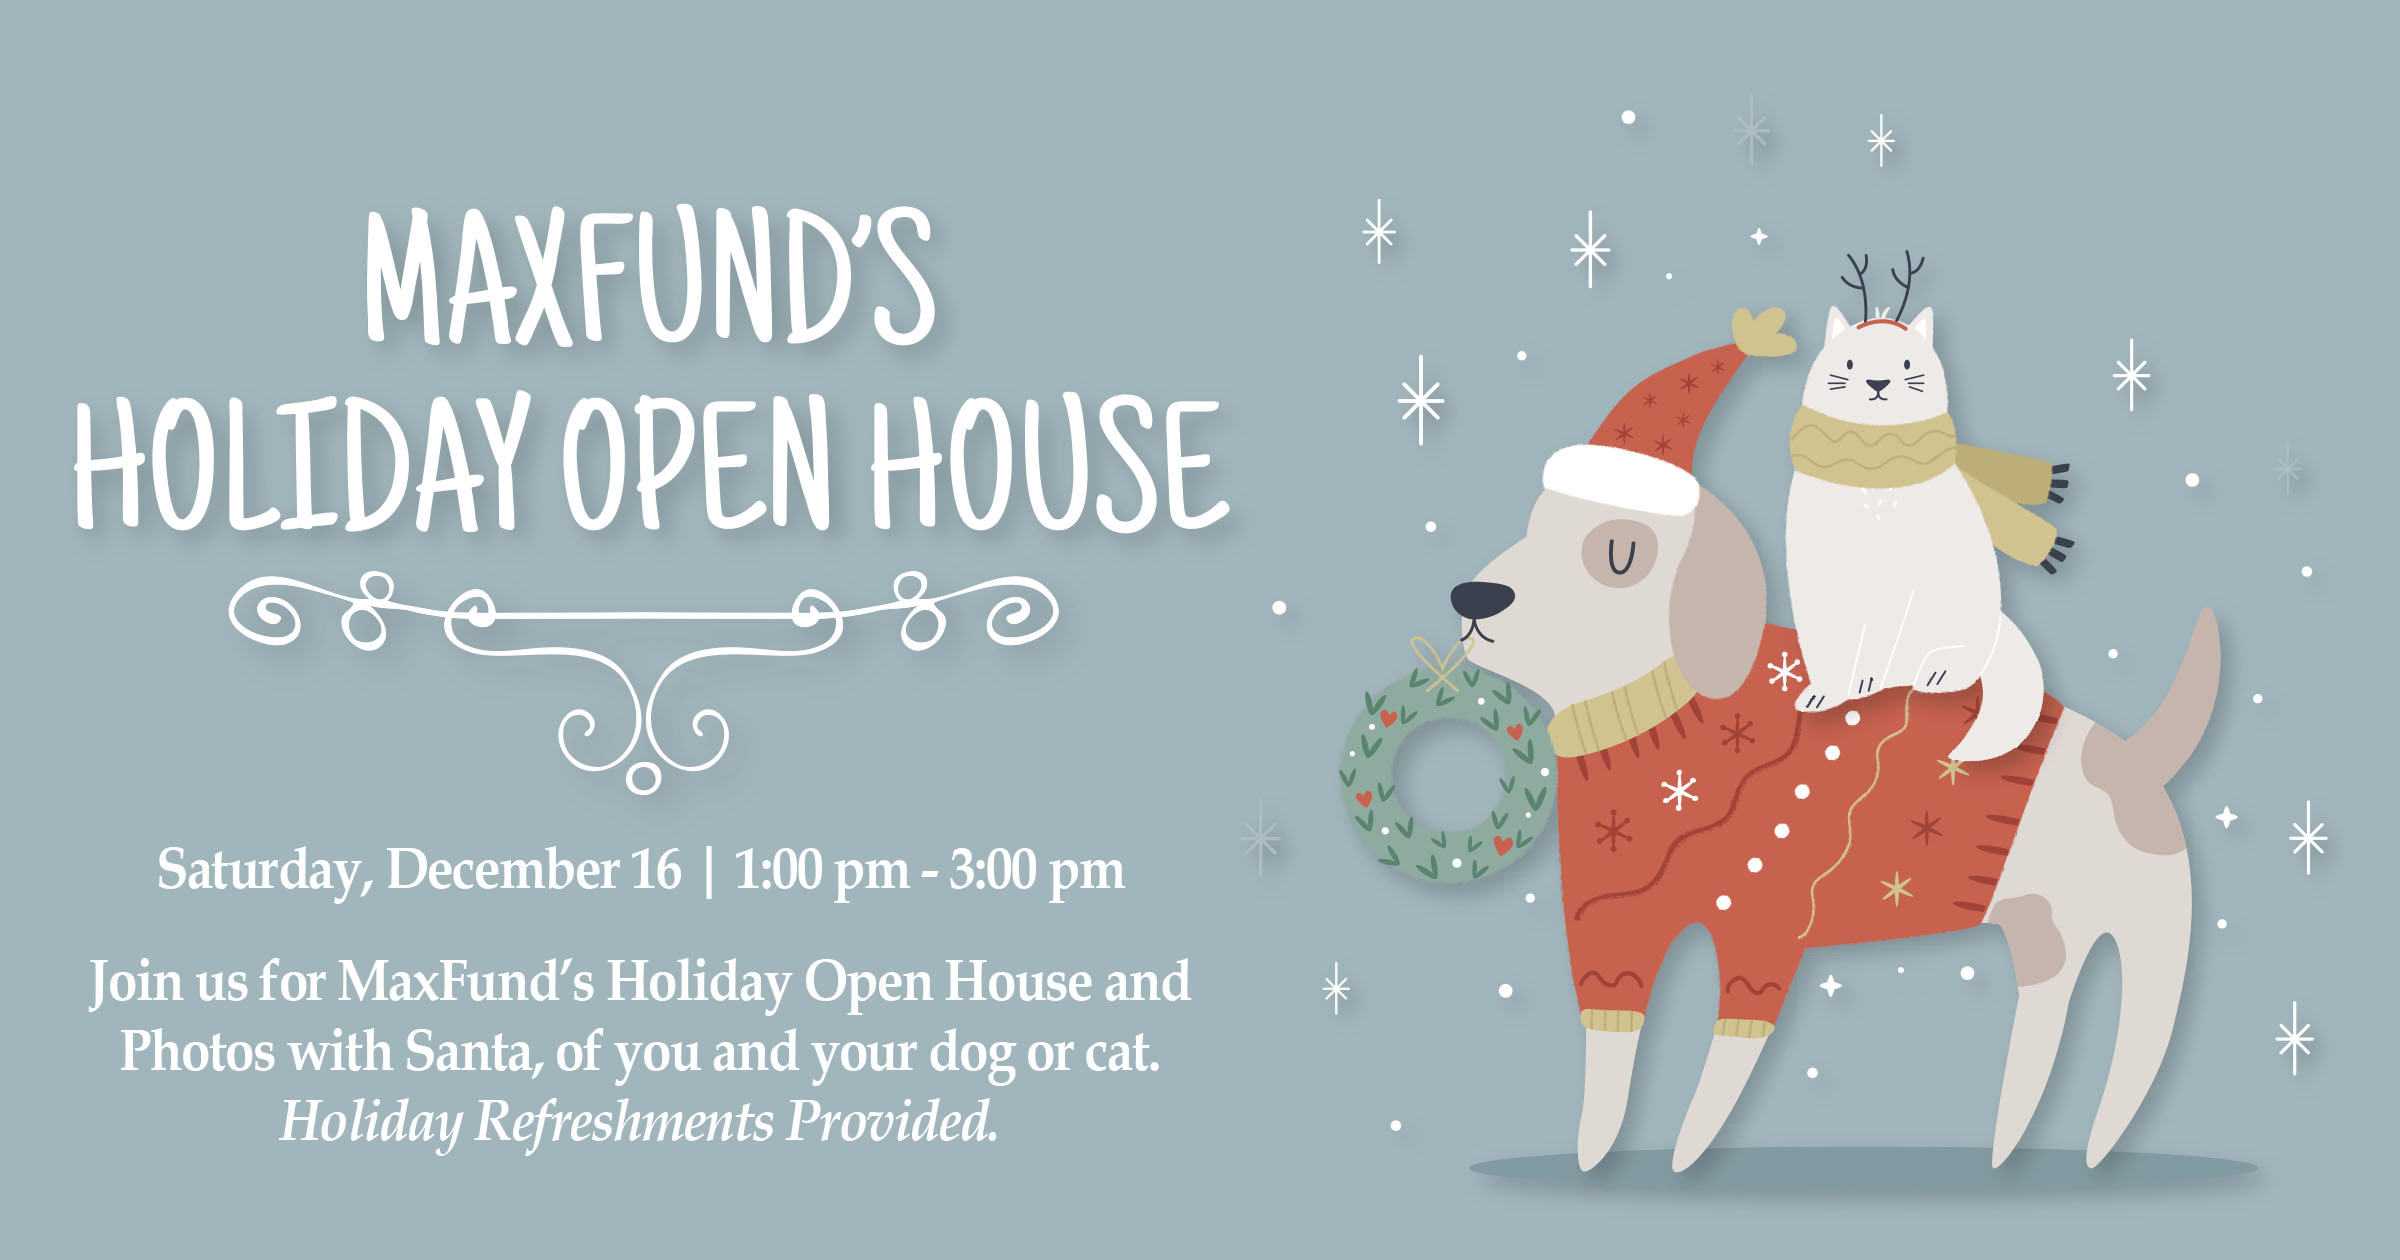 
MaxFund's Holiday Open House